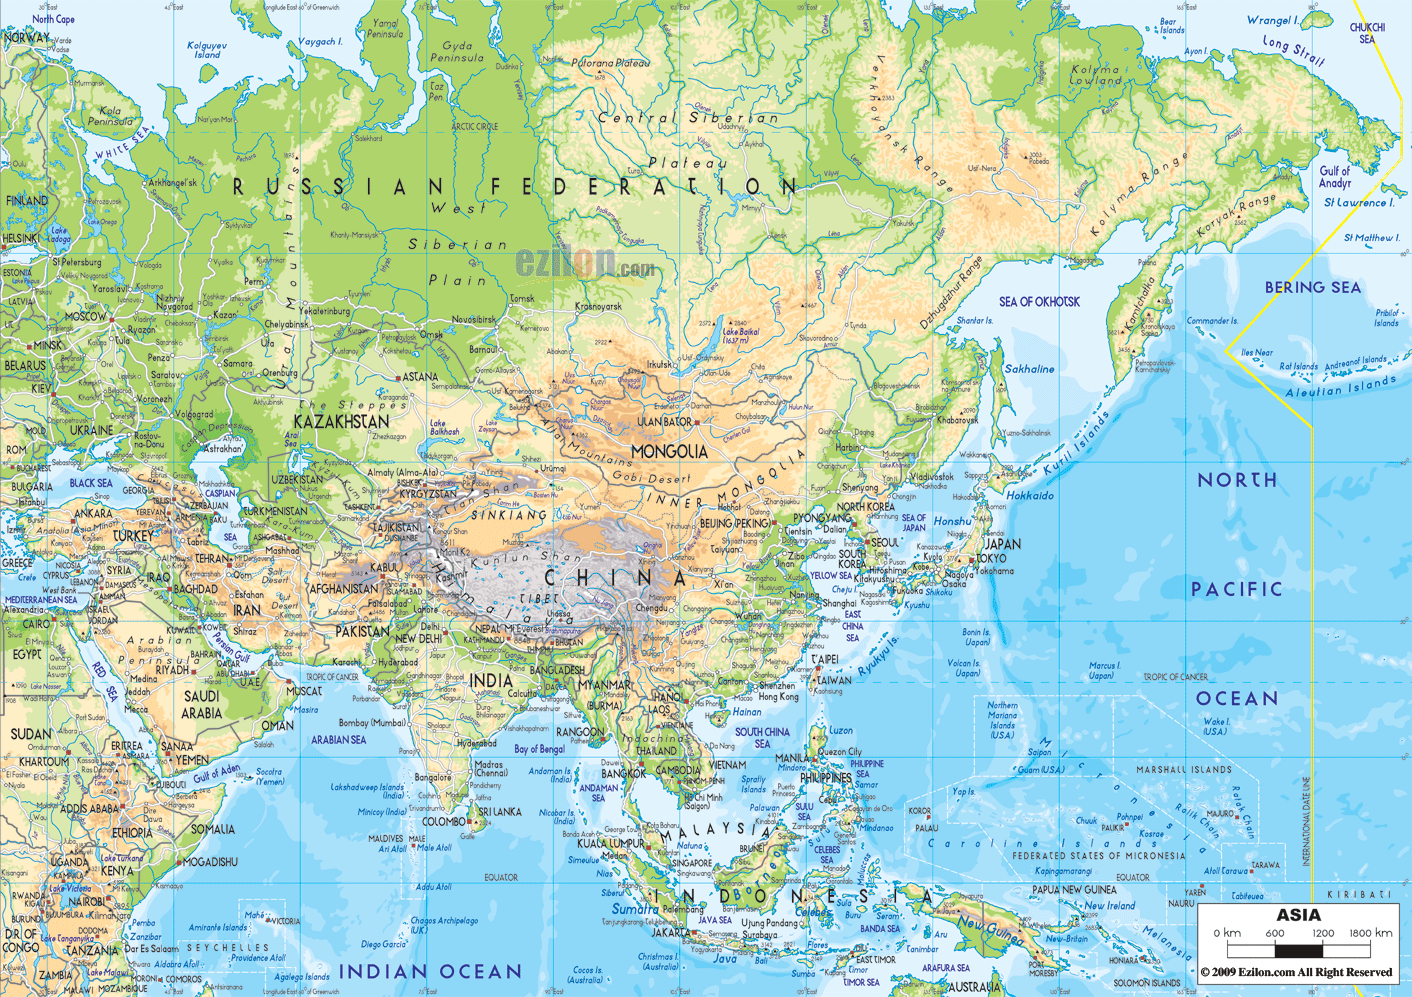 Physical Map of Asia showing major geographical features like elevations, mountain ranges, deserts, seas, lakes, plateaus, peninsulas, rivers, plains, landforms, areas with vegetations & other topographic features.